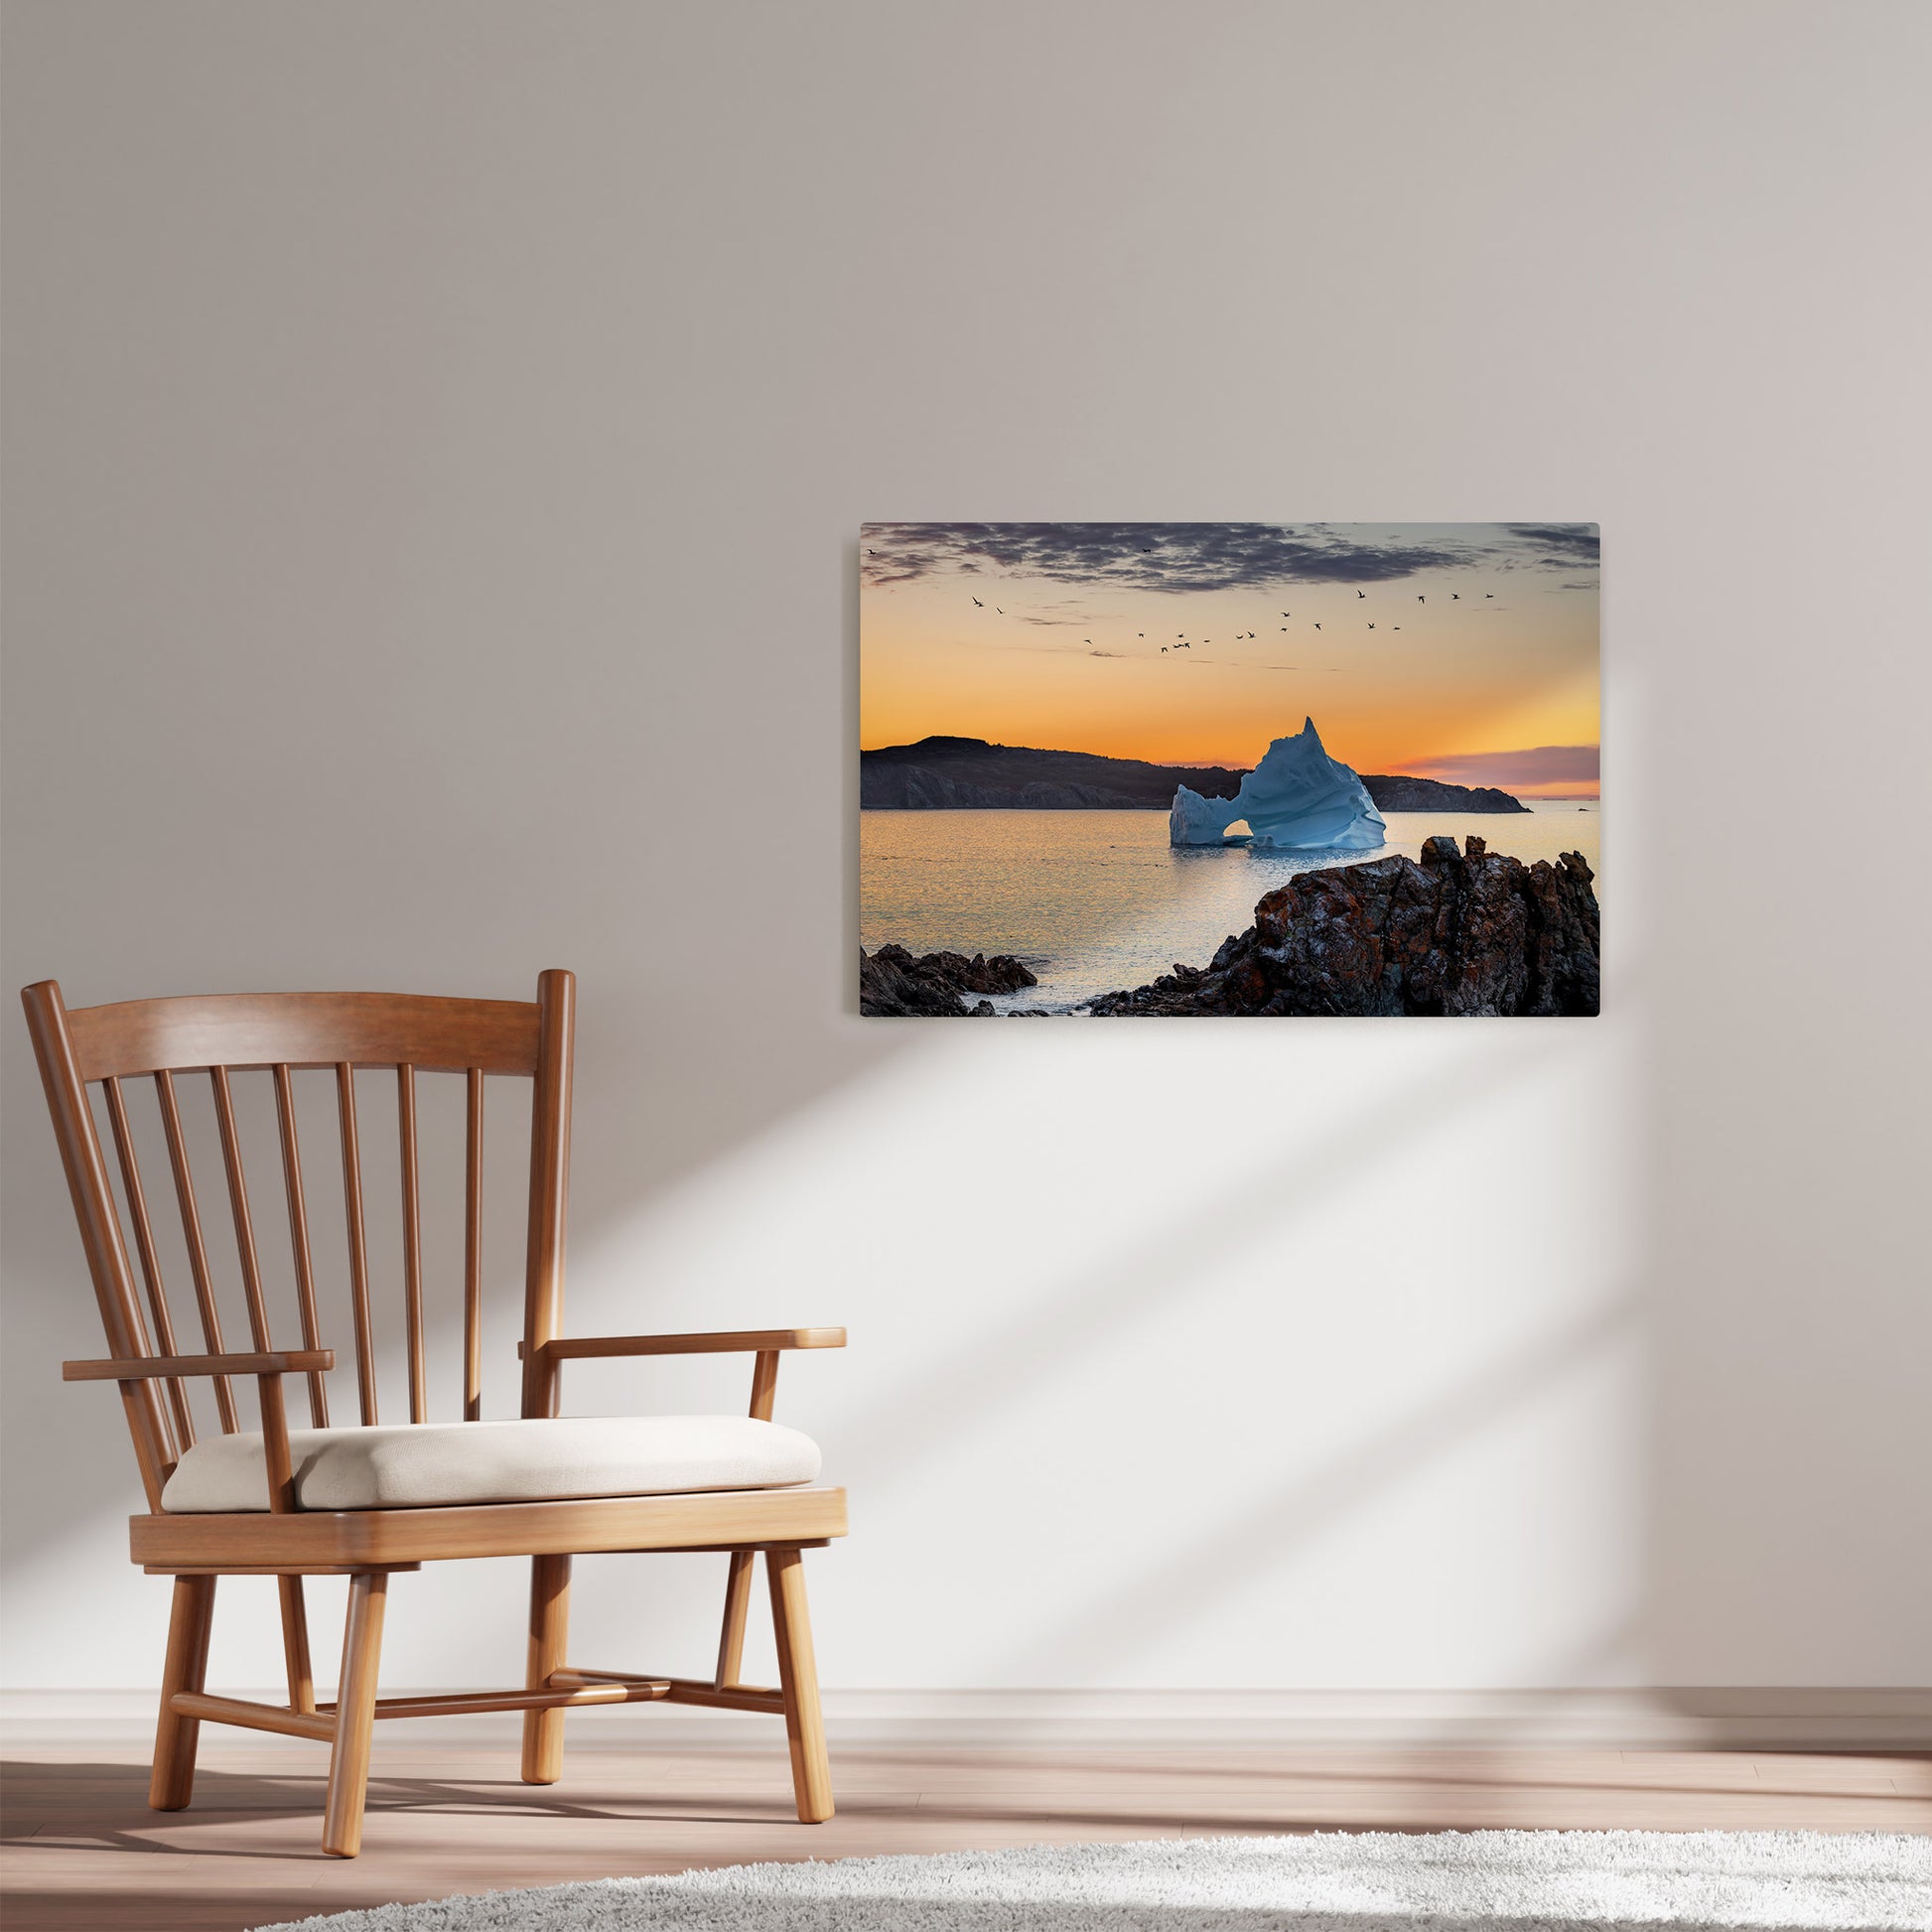 Ray Mackey's Twillingate Iceberg Ganetts photography reproduced on HD metal print and displayed on wall